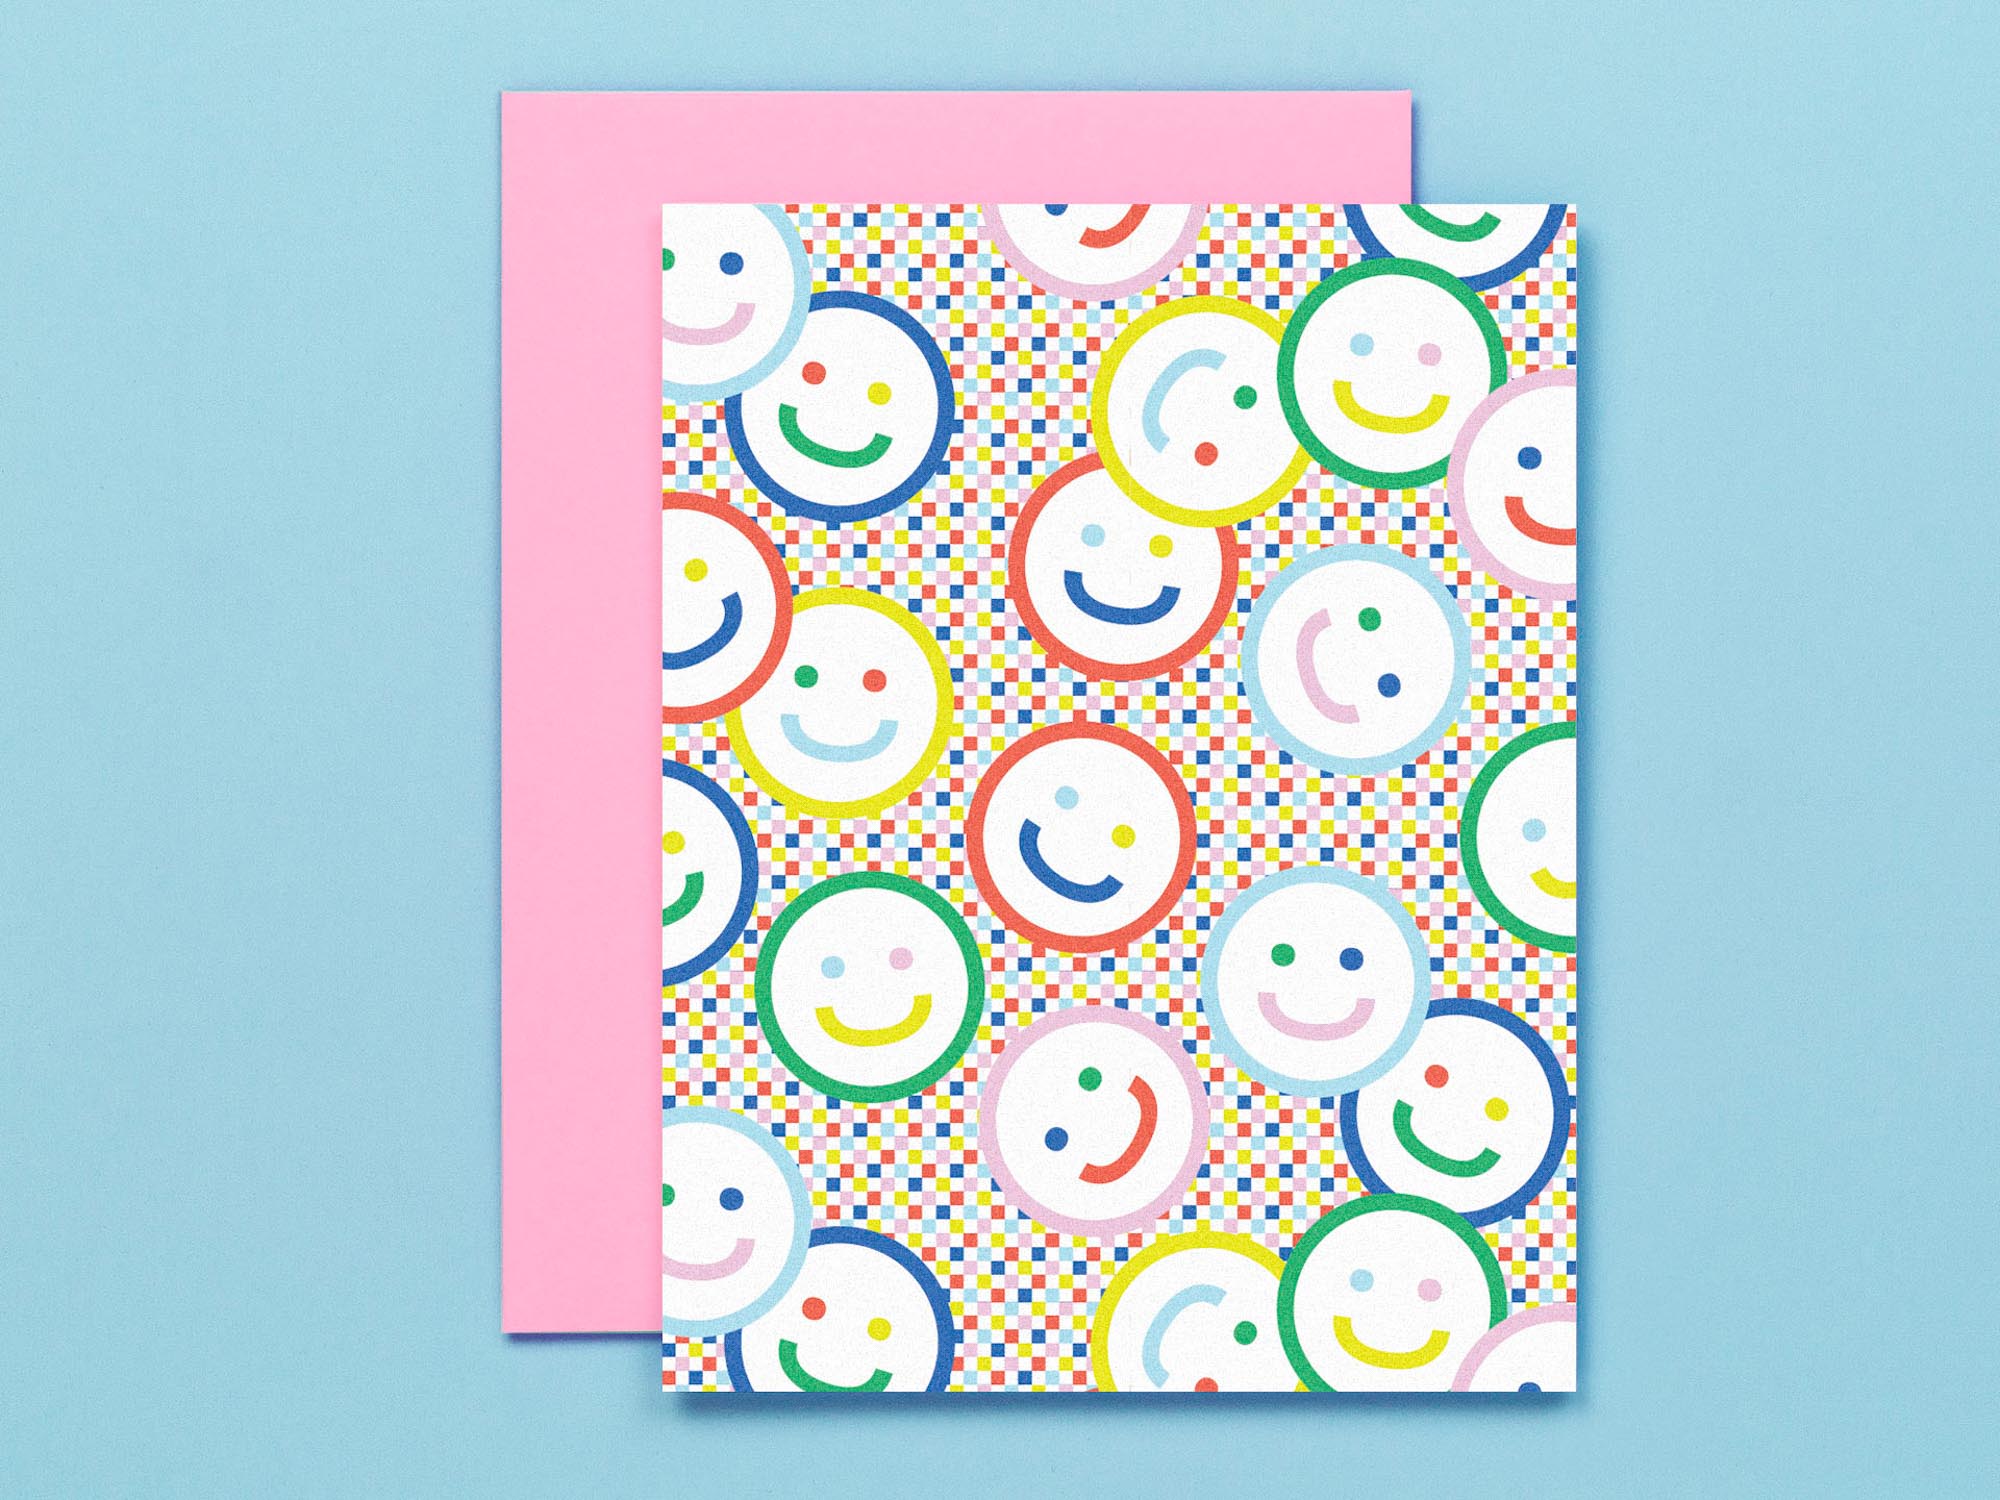 "Check yr smile" blank pattern greeting card with smiley faces against a rainbow checker background. Made in USA by @mydarlin_bk